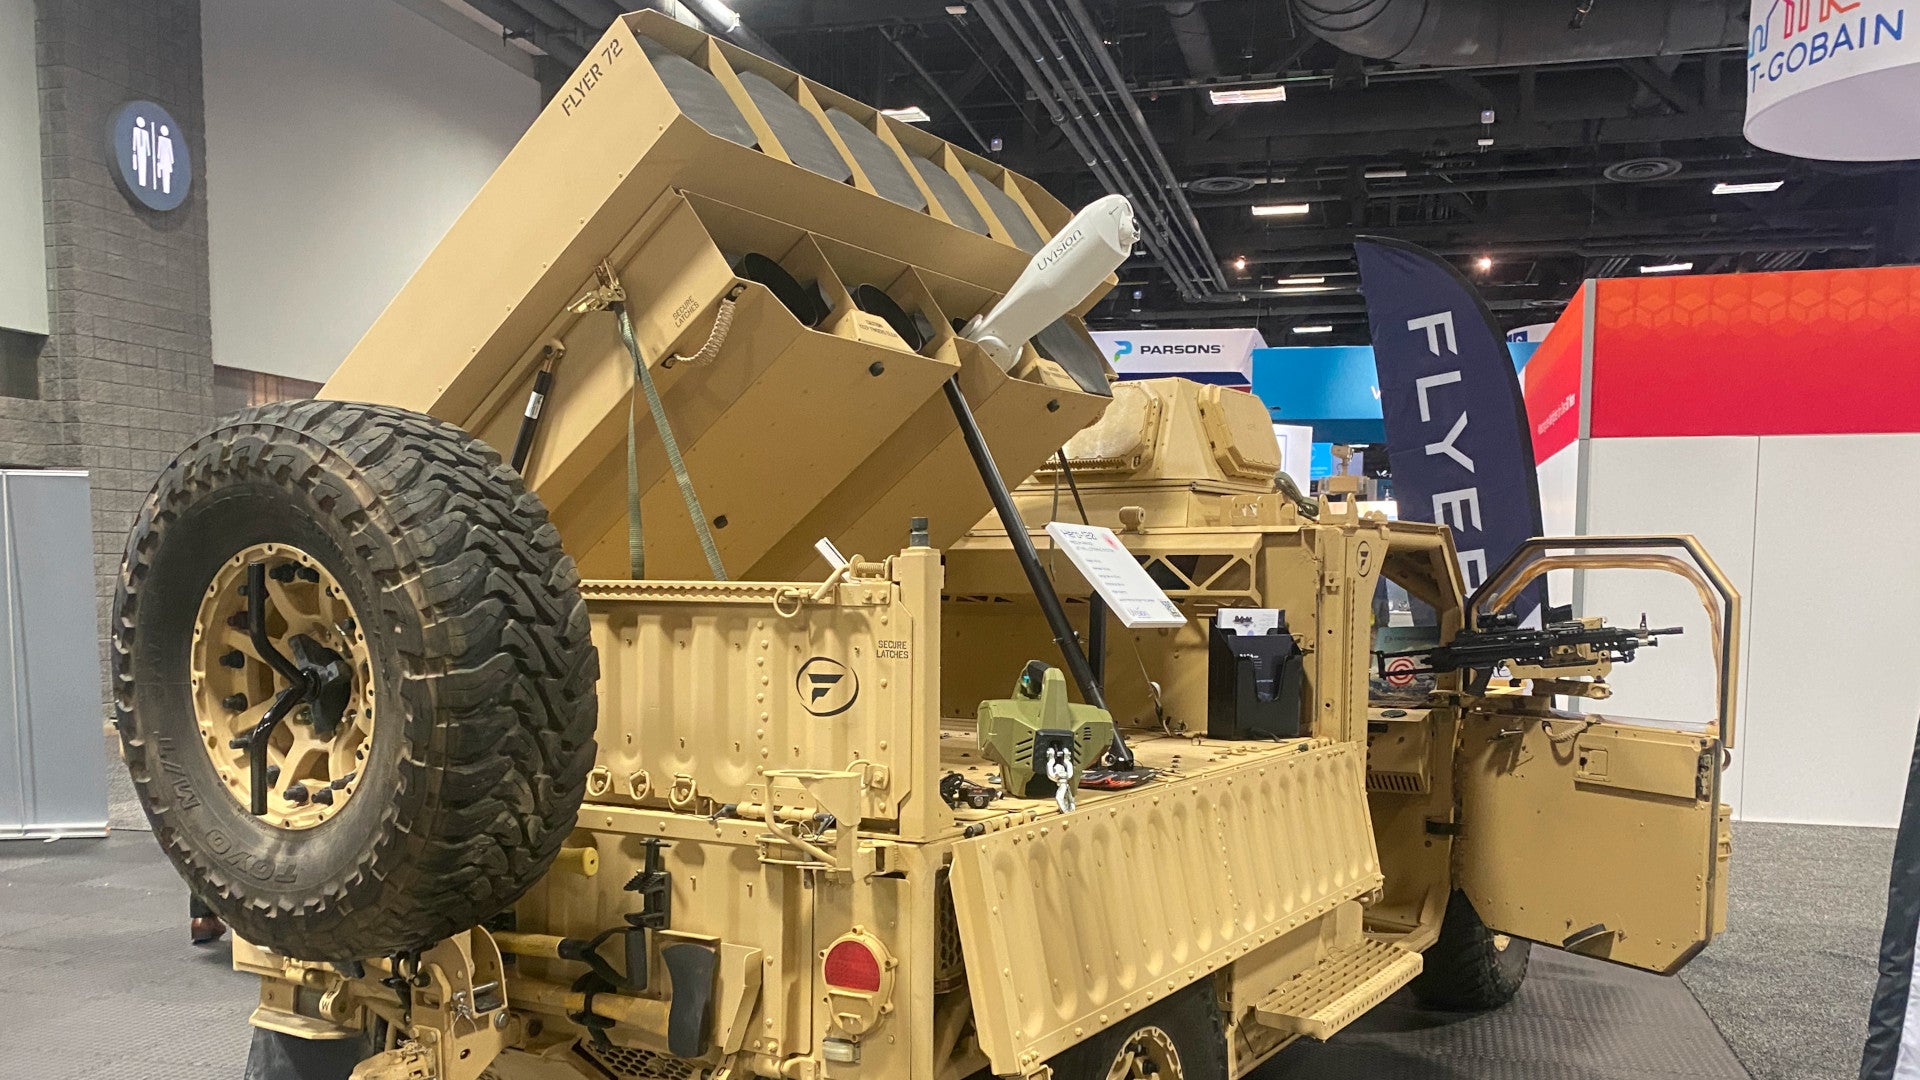 Light Vehicles Bristling With Suicide Drones Were Trending At This Year's Army Convention